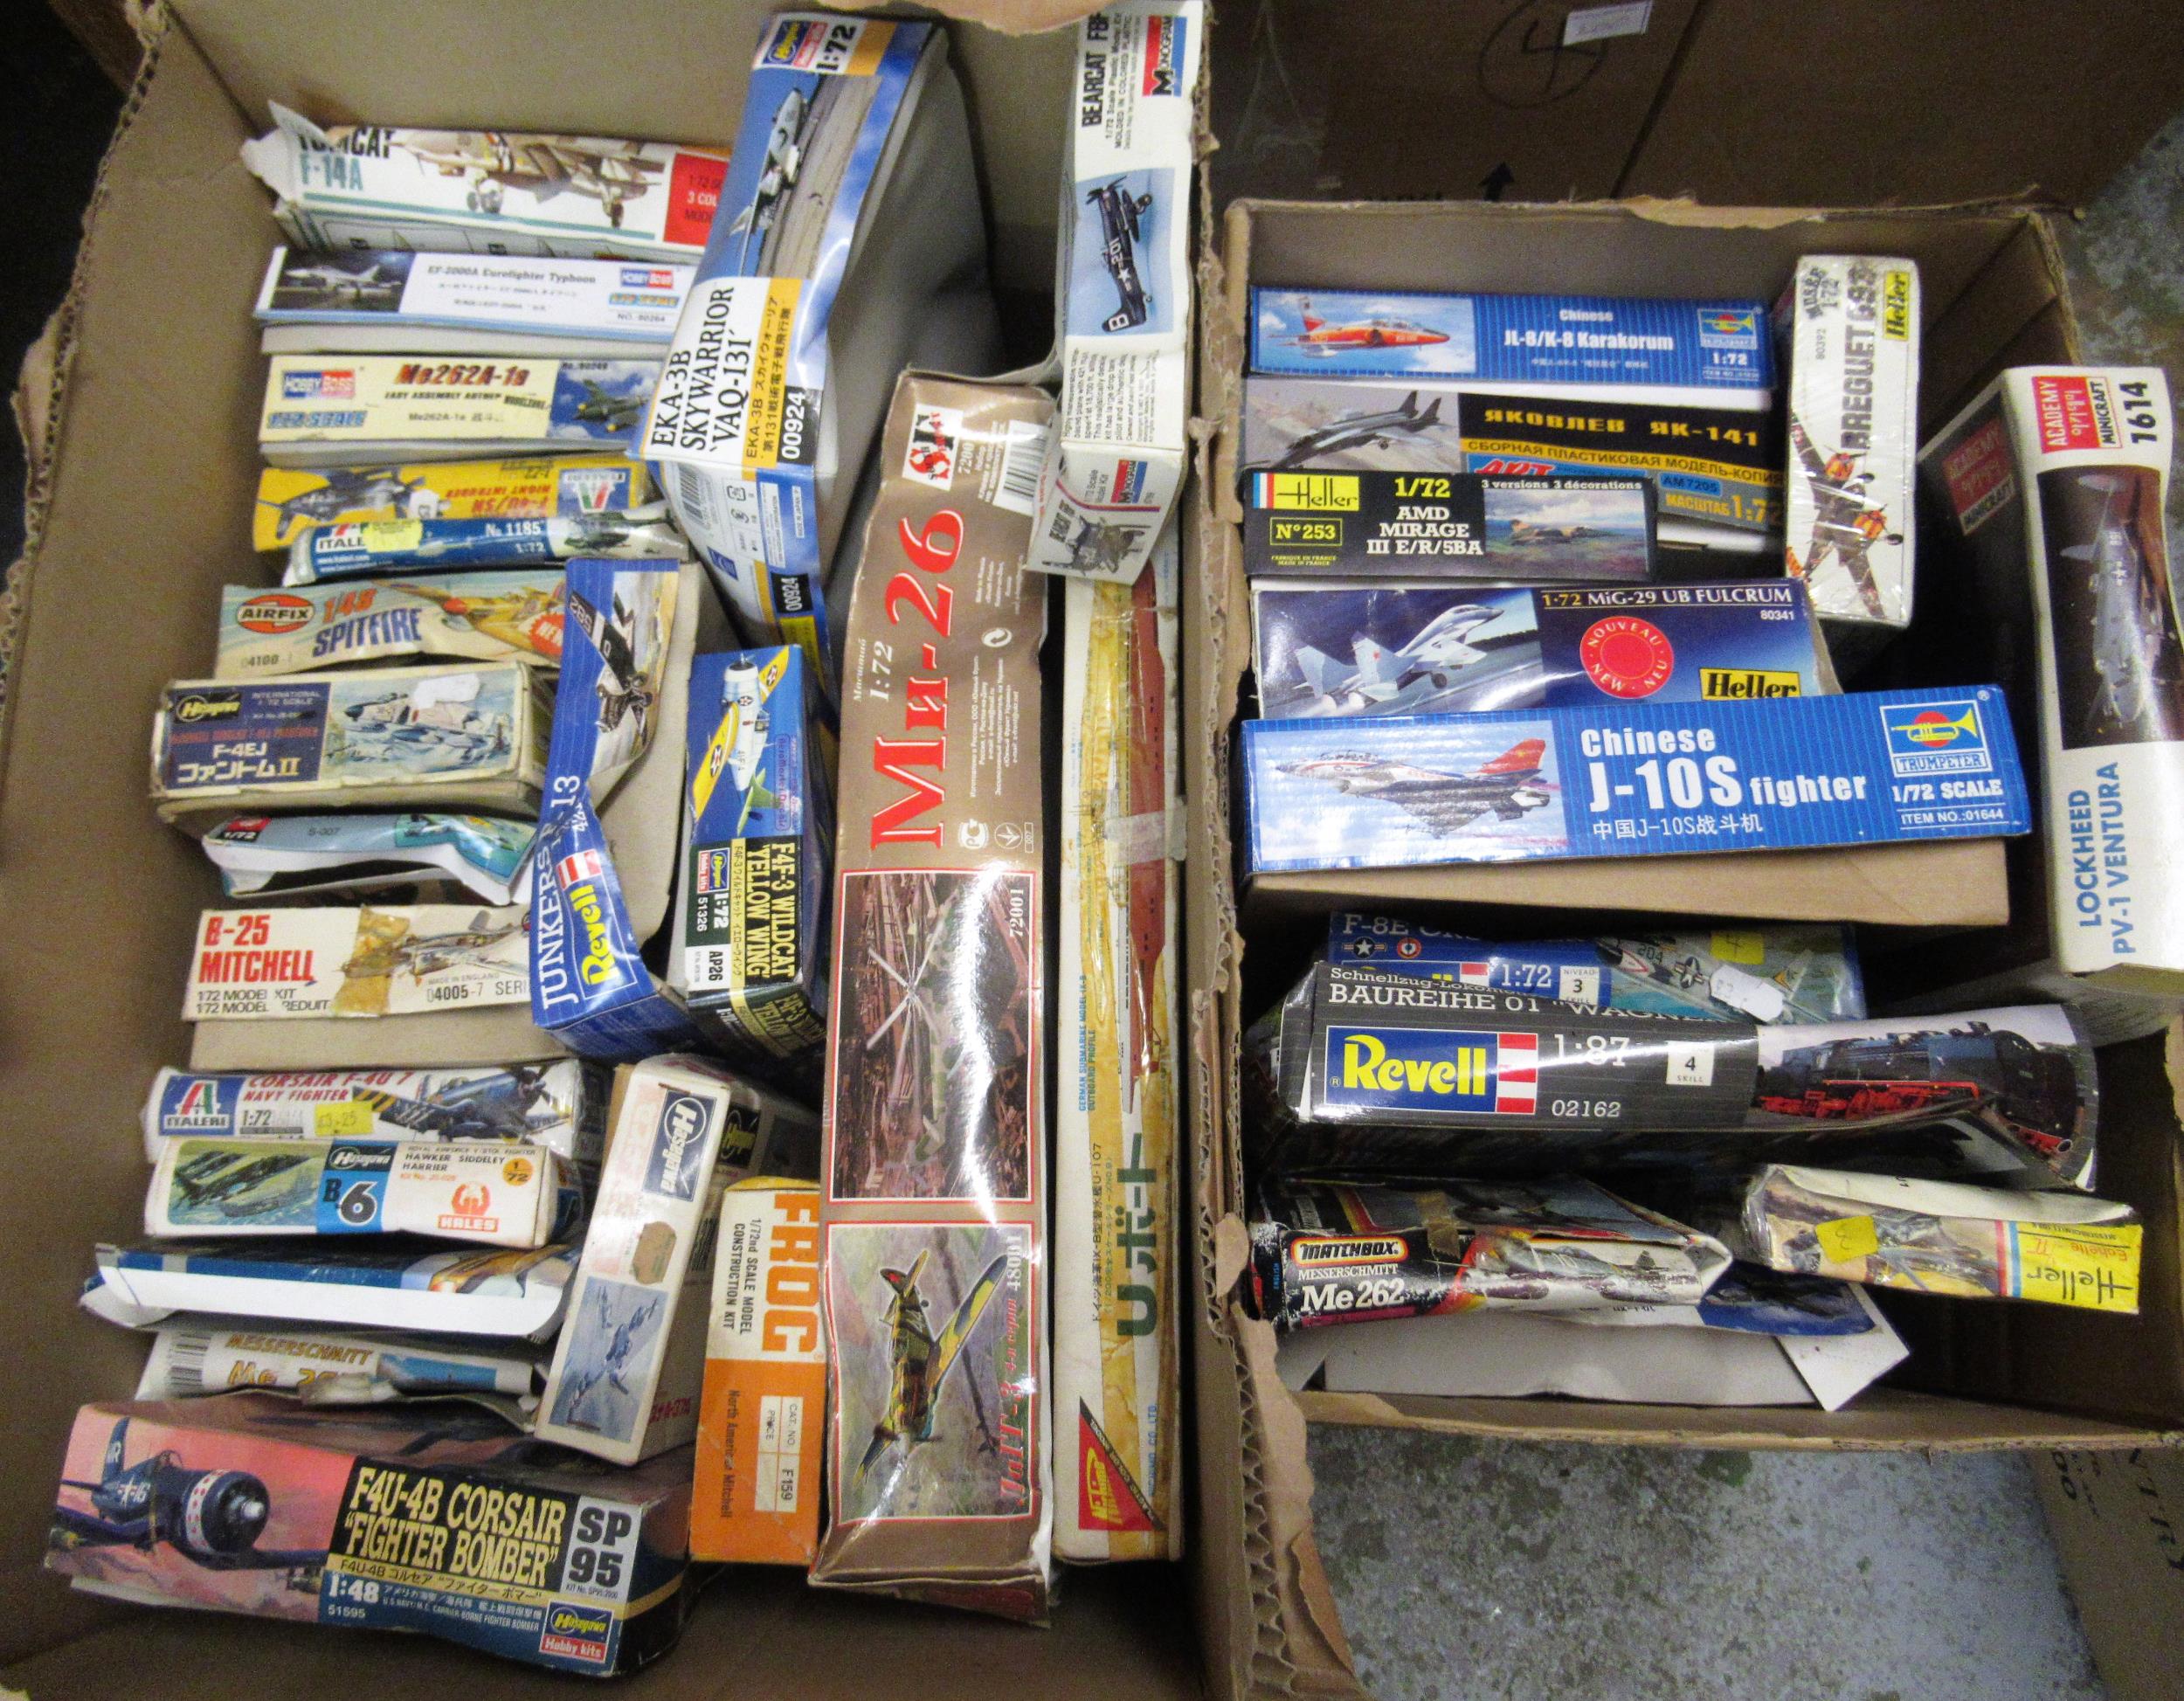 Two boxes containing a large quantity of unbuilt model aircraft kits including Airfix, Revell etc.